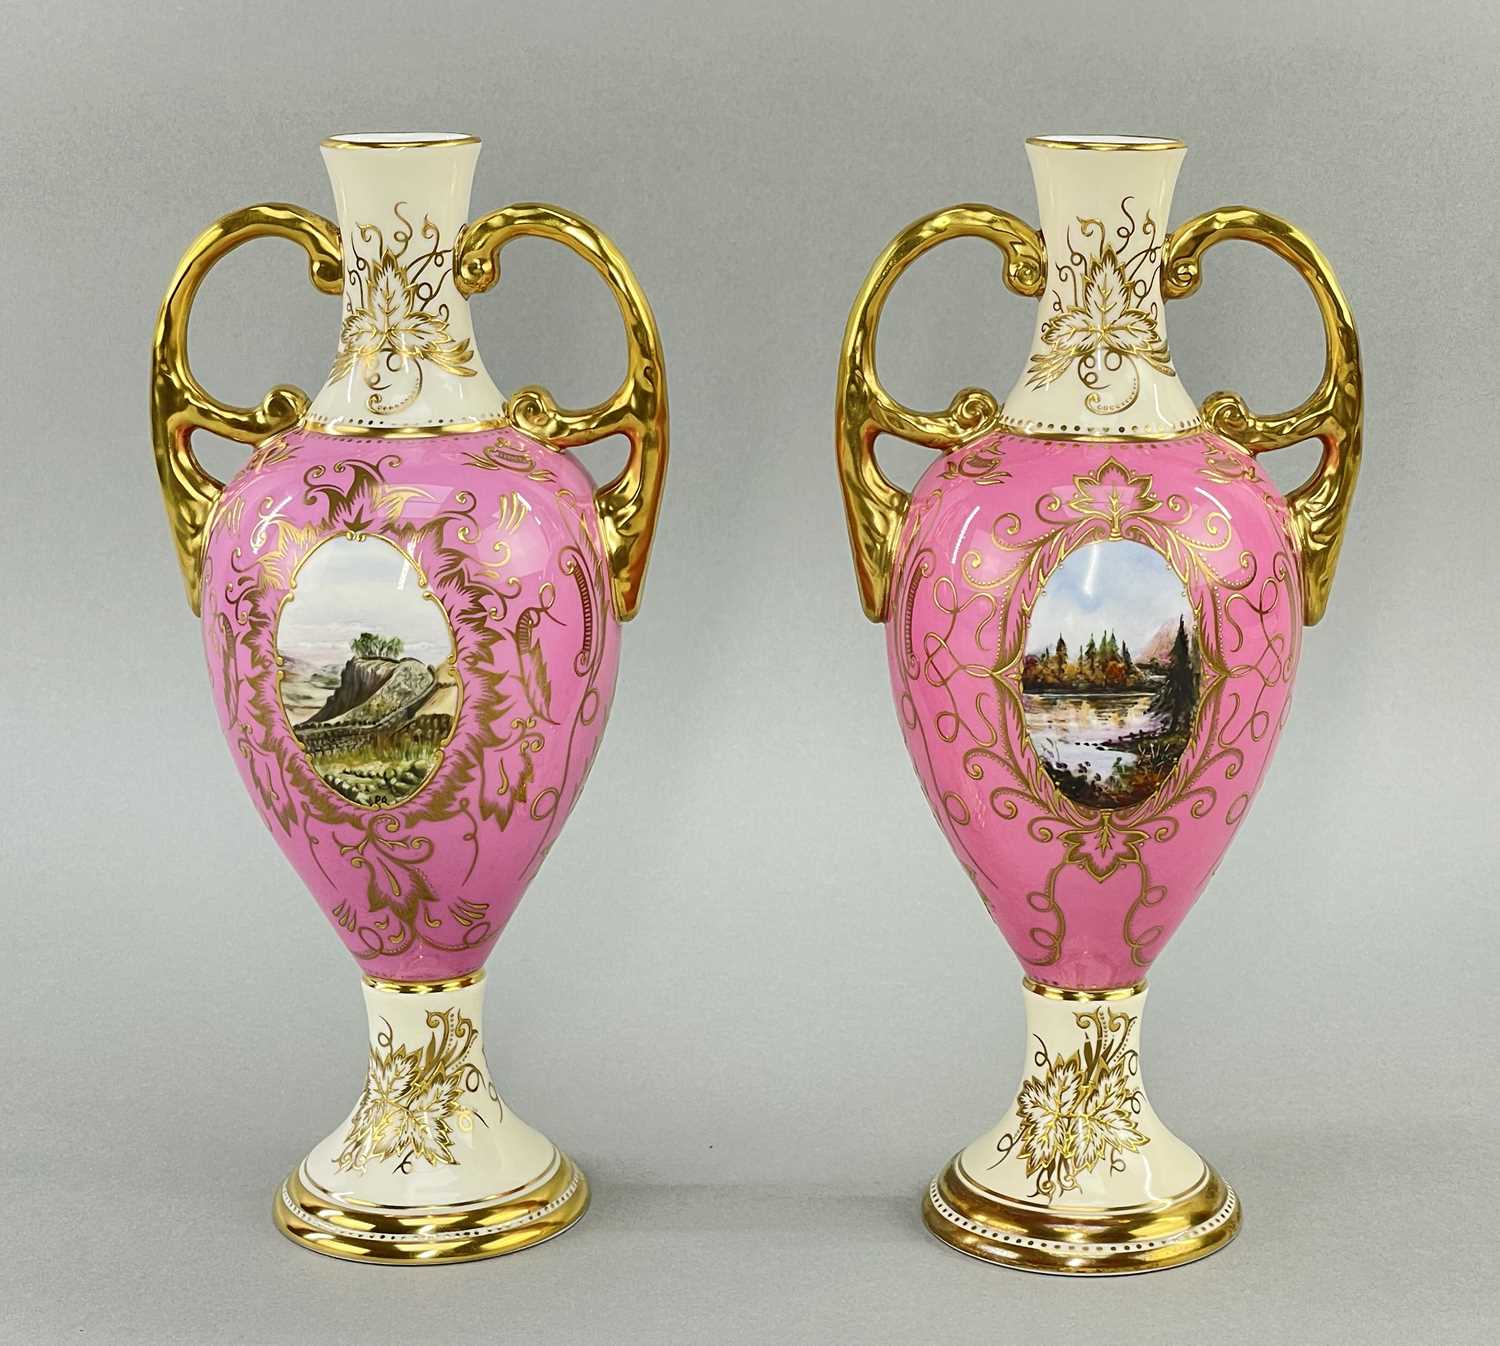 MATCHED PAIR COALPORT TWIN HANDLES VASES, each painted with two oval vignettes of Highland - Image 2 of 2